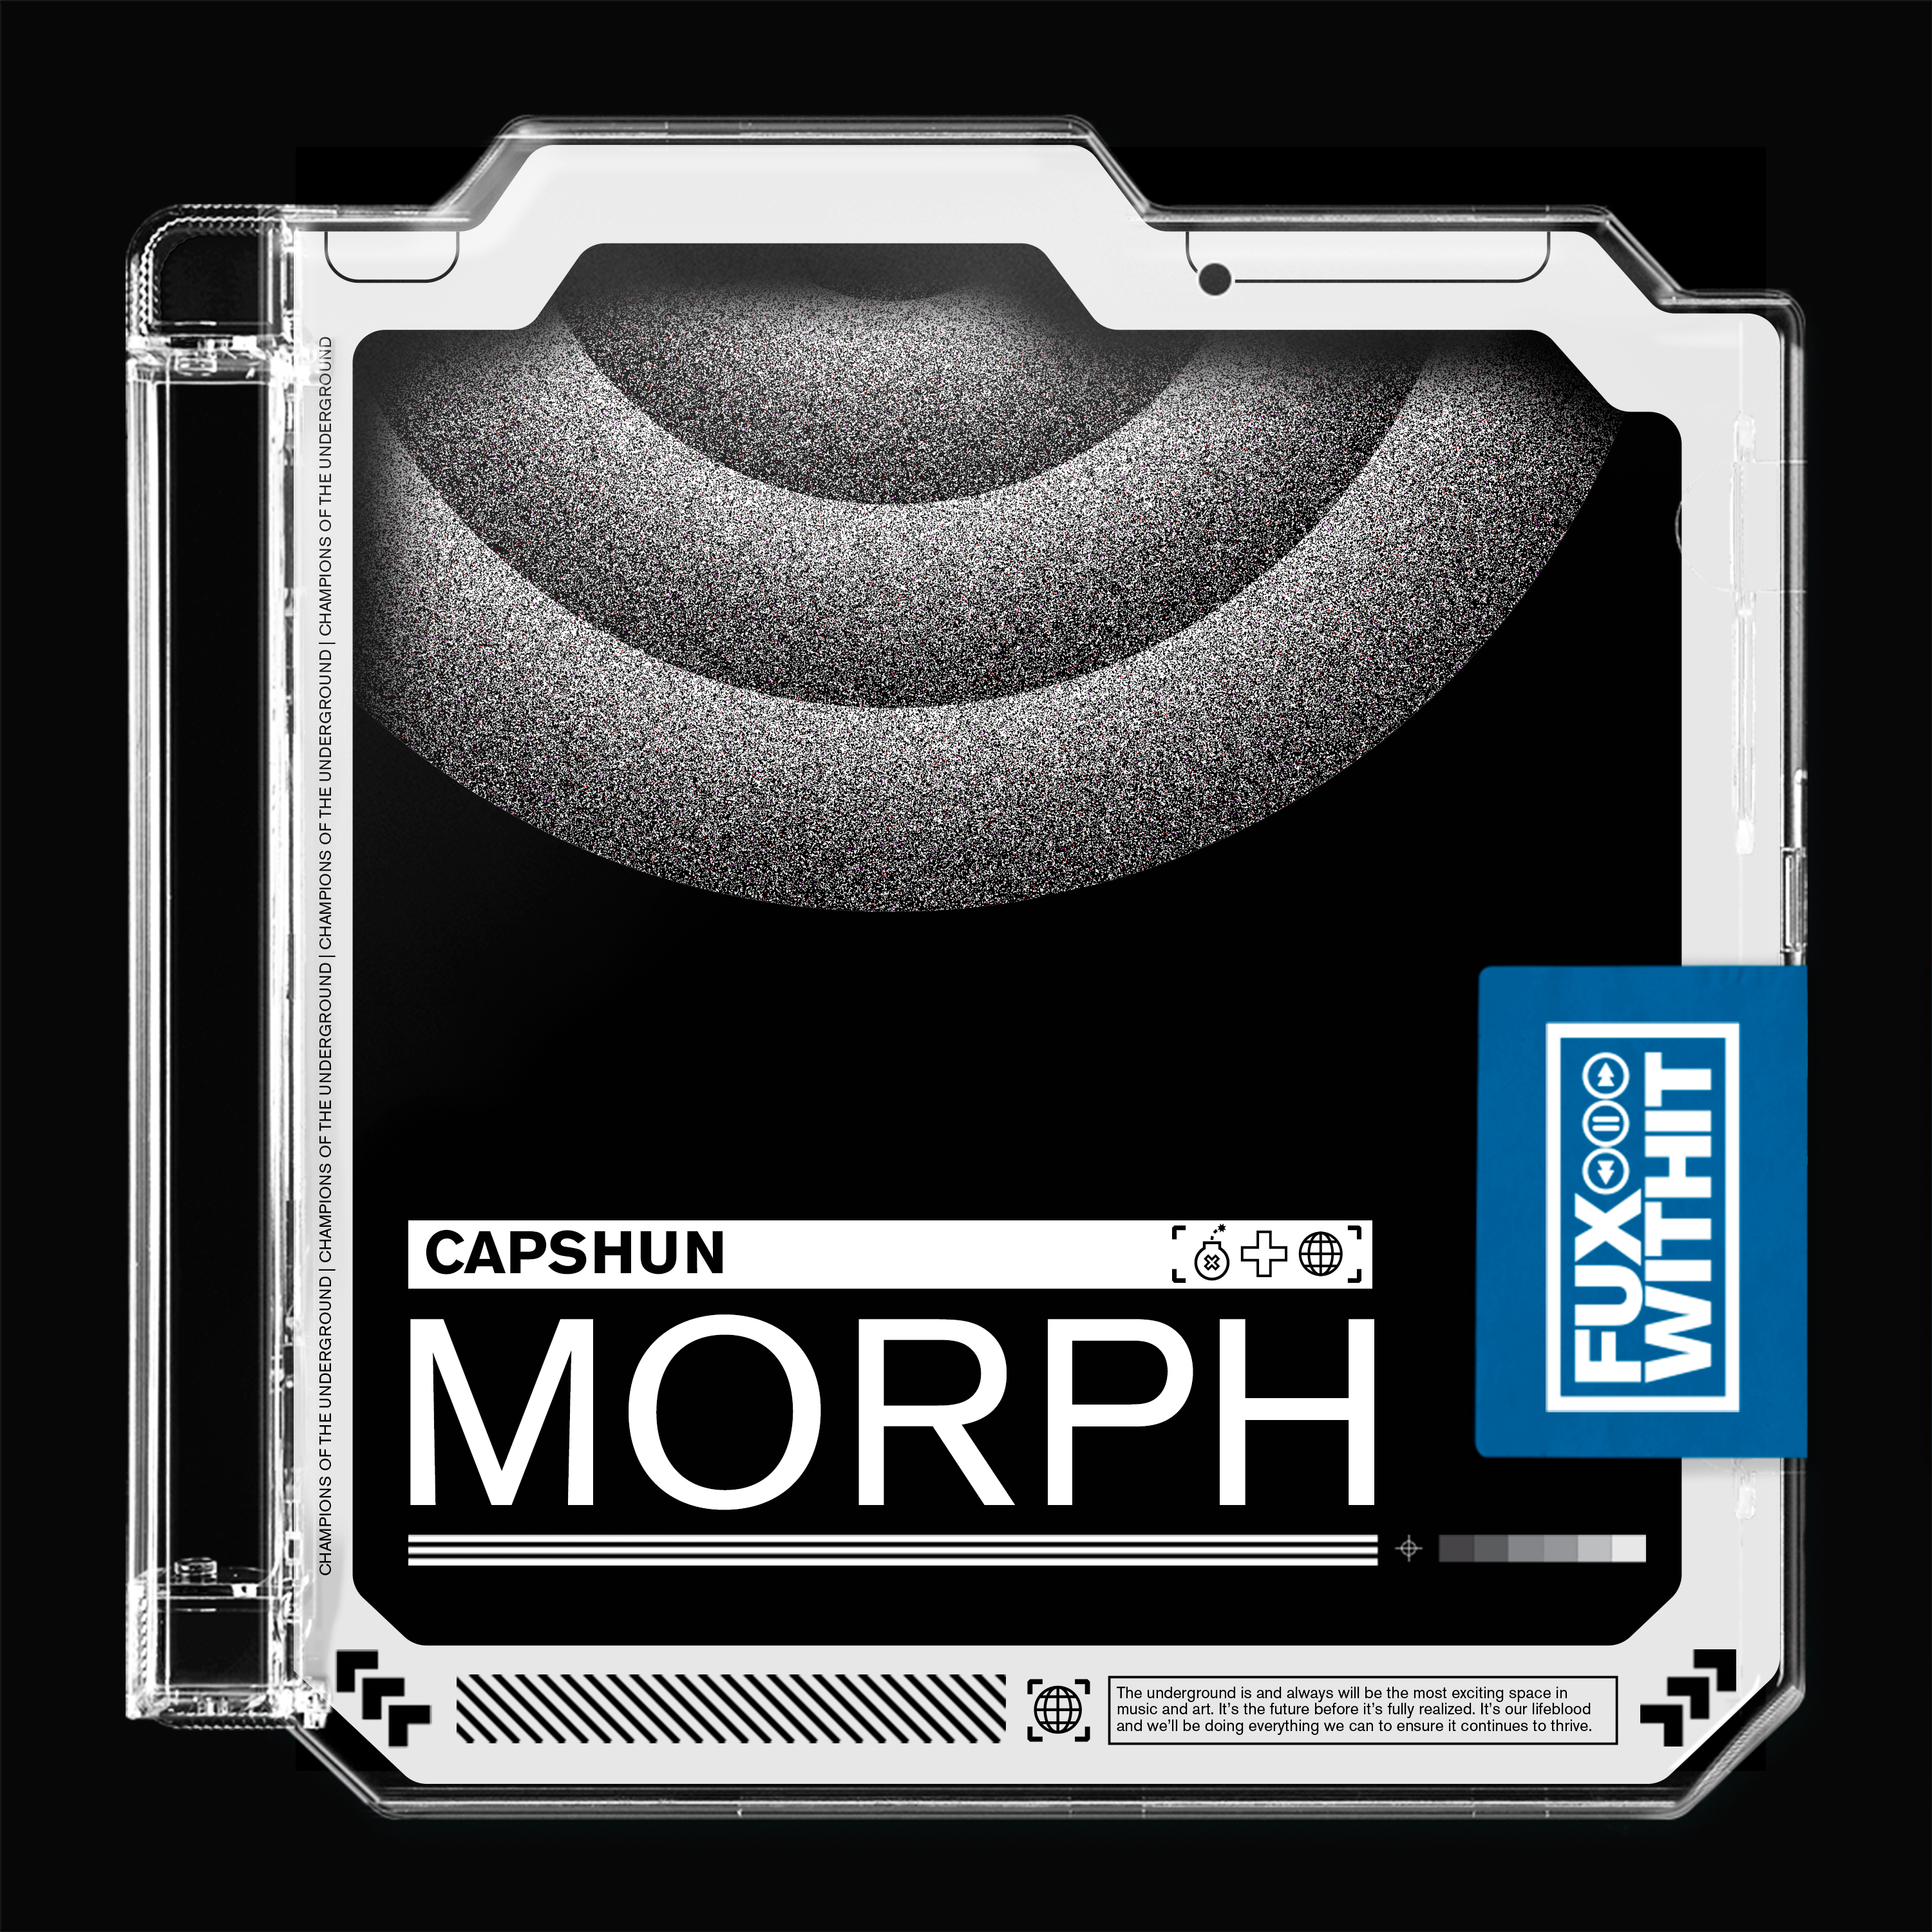 FUXWITHIT Launches Music Label, Drops Capshun’s ‘Morph’ As Debut Single